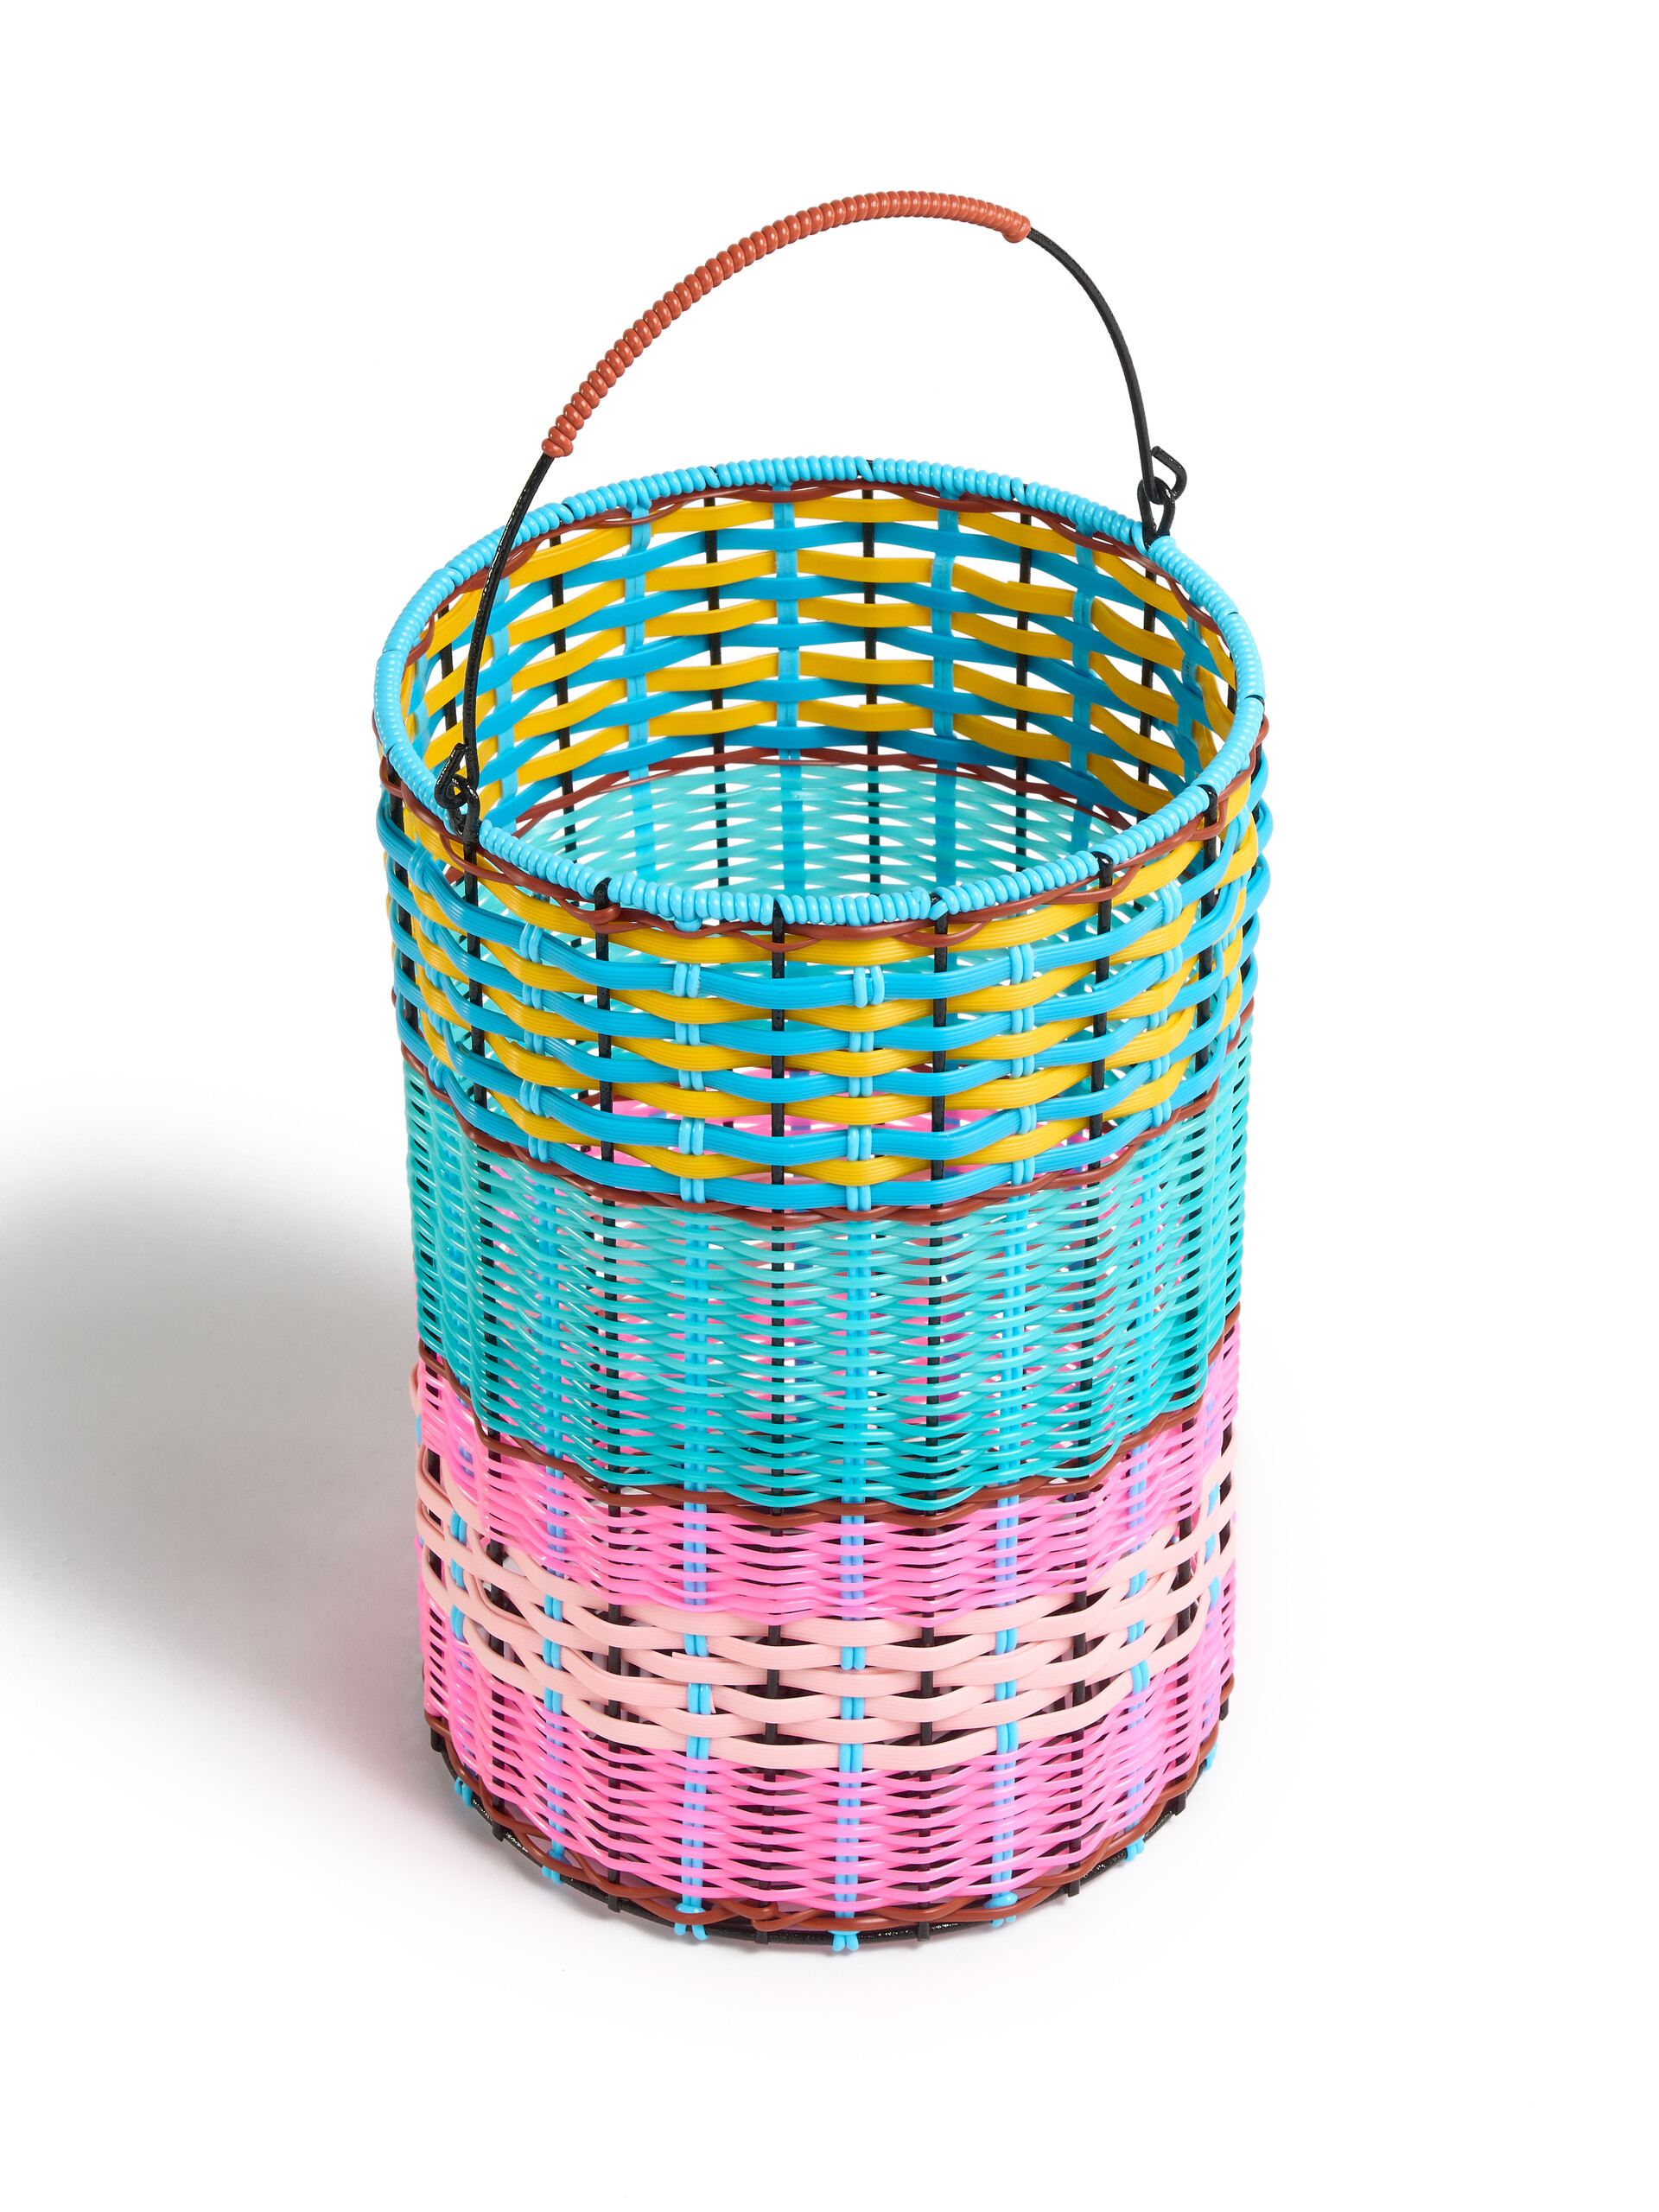 Blue and pink MARNI MARKET woven cable basket - Accessories - Image 3